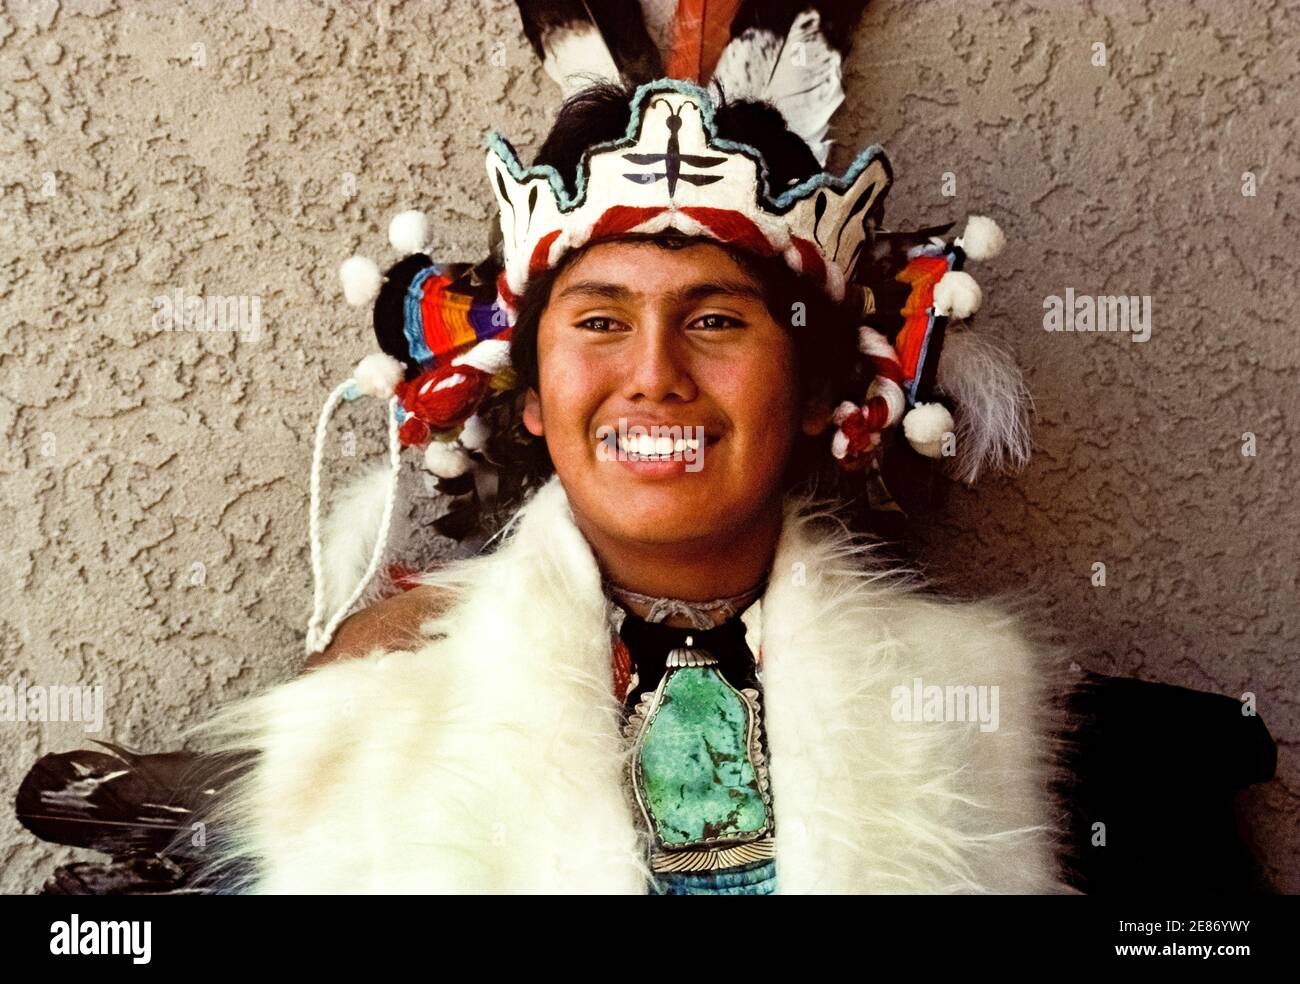 A young Native American man poses in ceremonial dress during a celebration of Indian culture by indigenous peoples of America who gathered to dance, sing and honor the traditions of their ancestors. The powwow was held in Albuquerque, New Mexico, USA, at the Indian Pueblo Cultural Center, a showcase for Pueblo tribes in that southwestern state. The man's elaborate headdress features an image of a dragonfly, a creature seen as a messenger that speaks to the thunder and clouds to bring moisture and blessings to the Pueblo people. Also eye-catching is his necklace with a large turquoise gemstone. Stock Photo